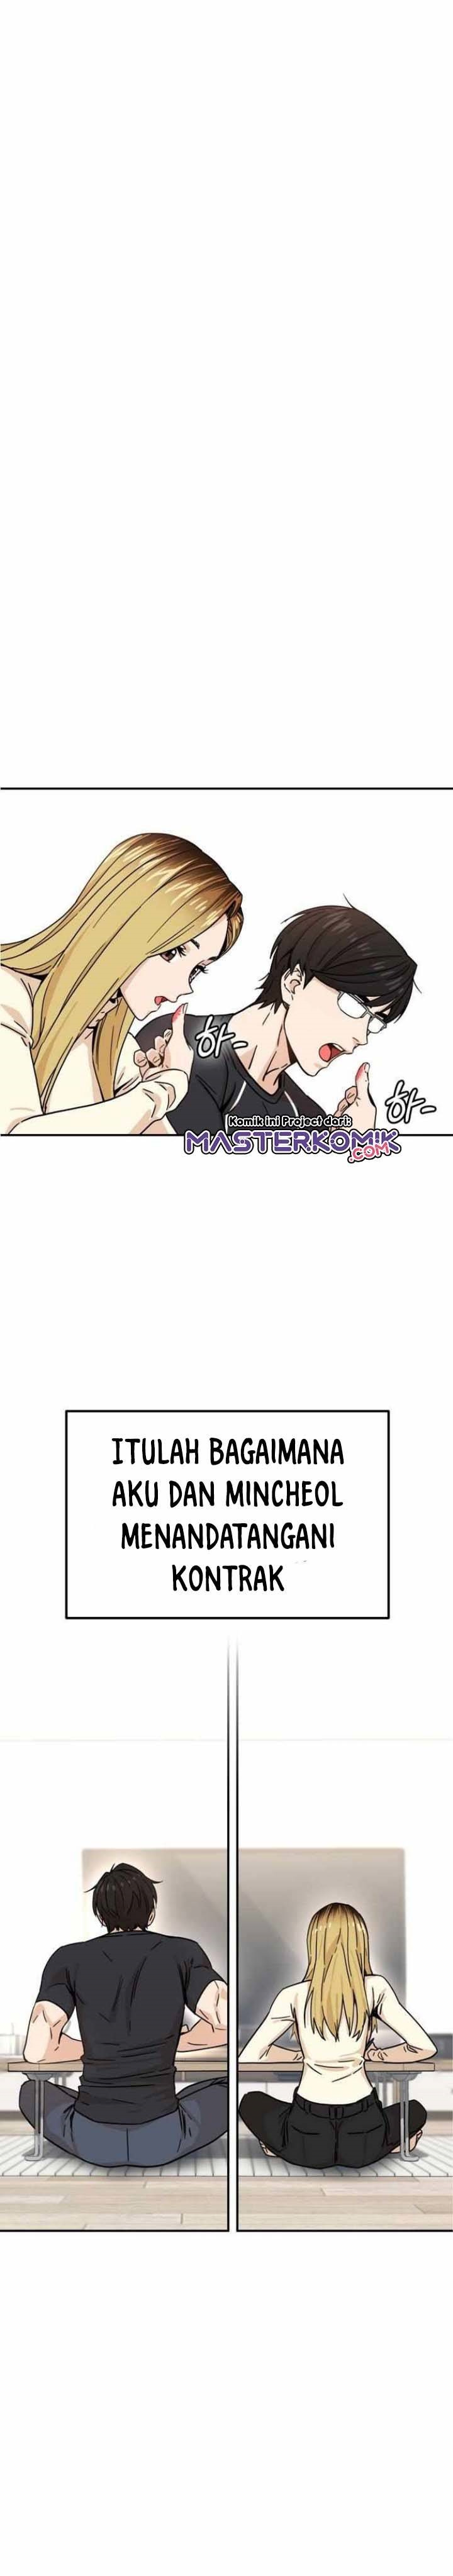 Match Made in Heaven by Chance Chapter 05